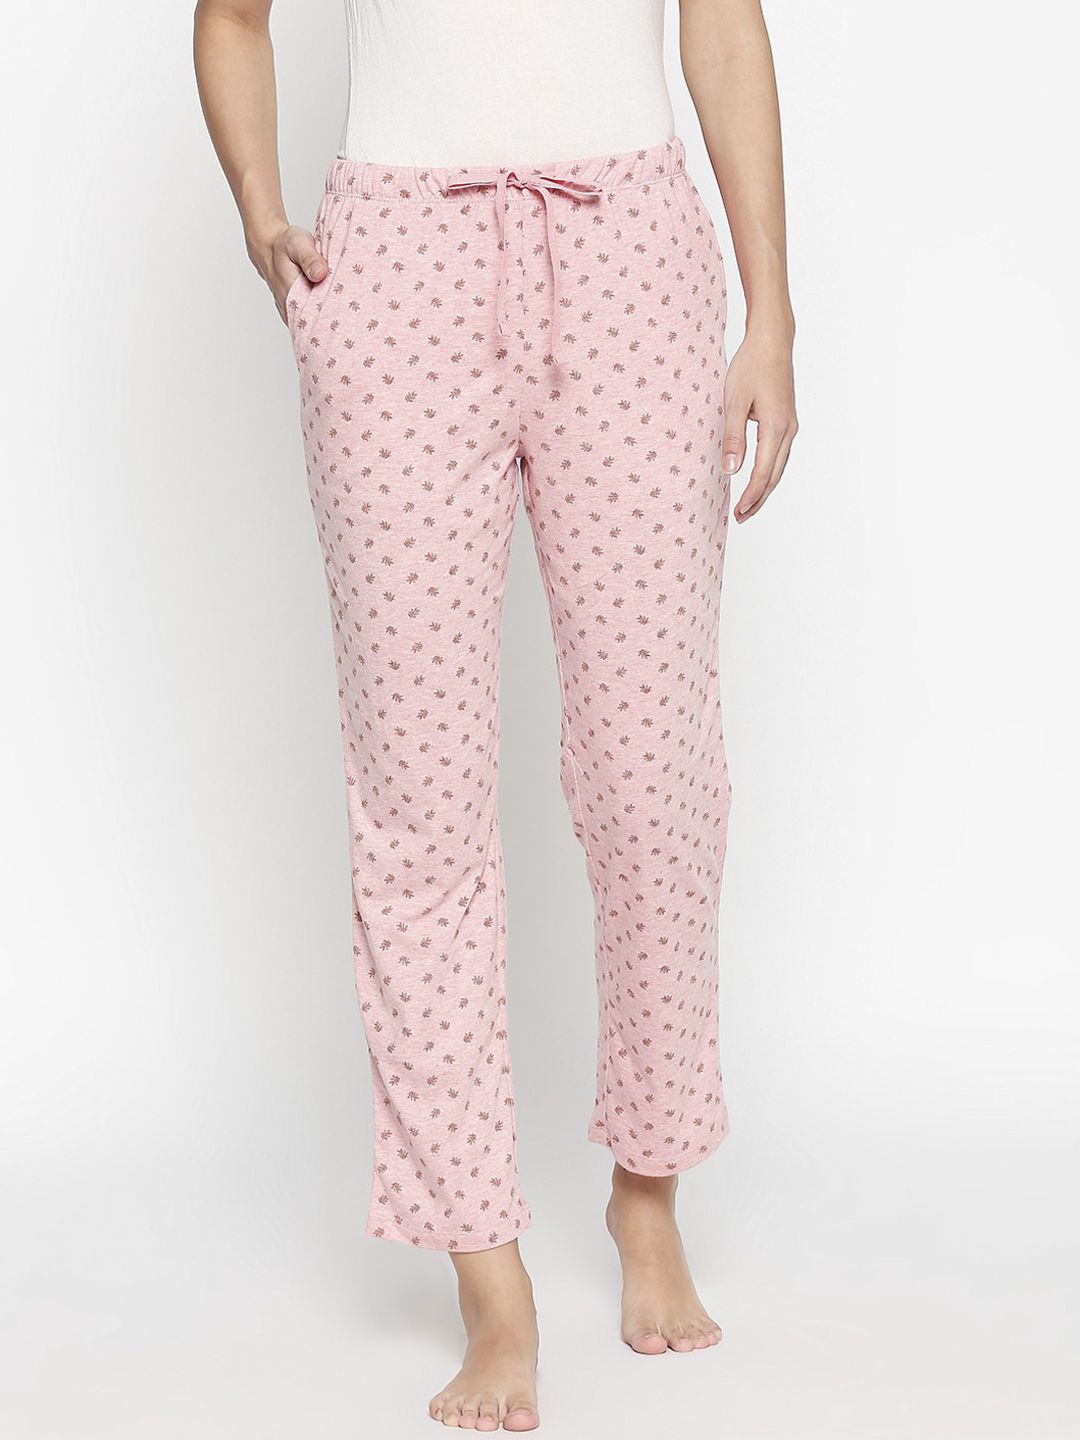 Dreamz by Pantaloons Women Pink Floral Printed Lounge Pants Price in India